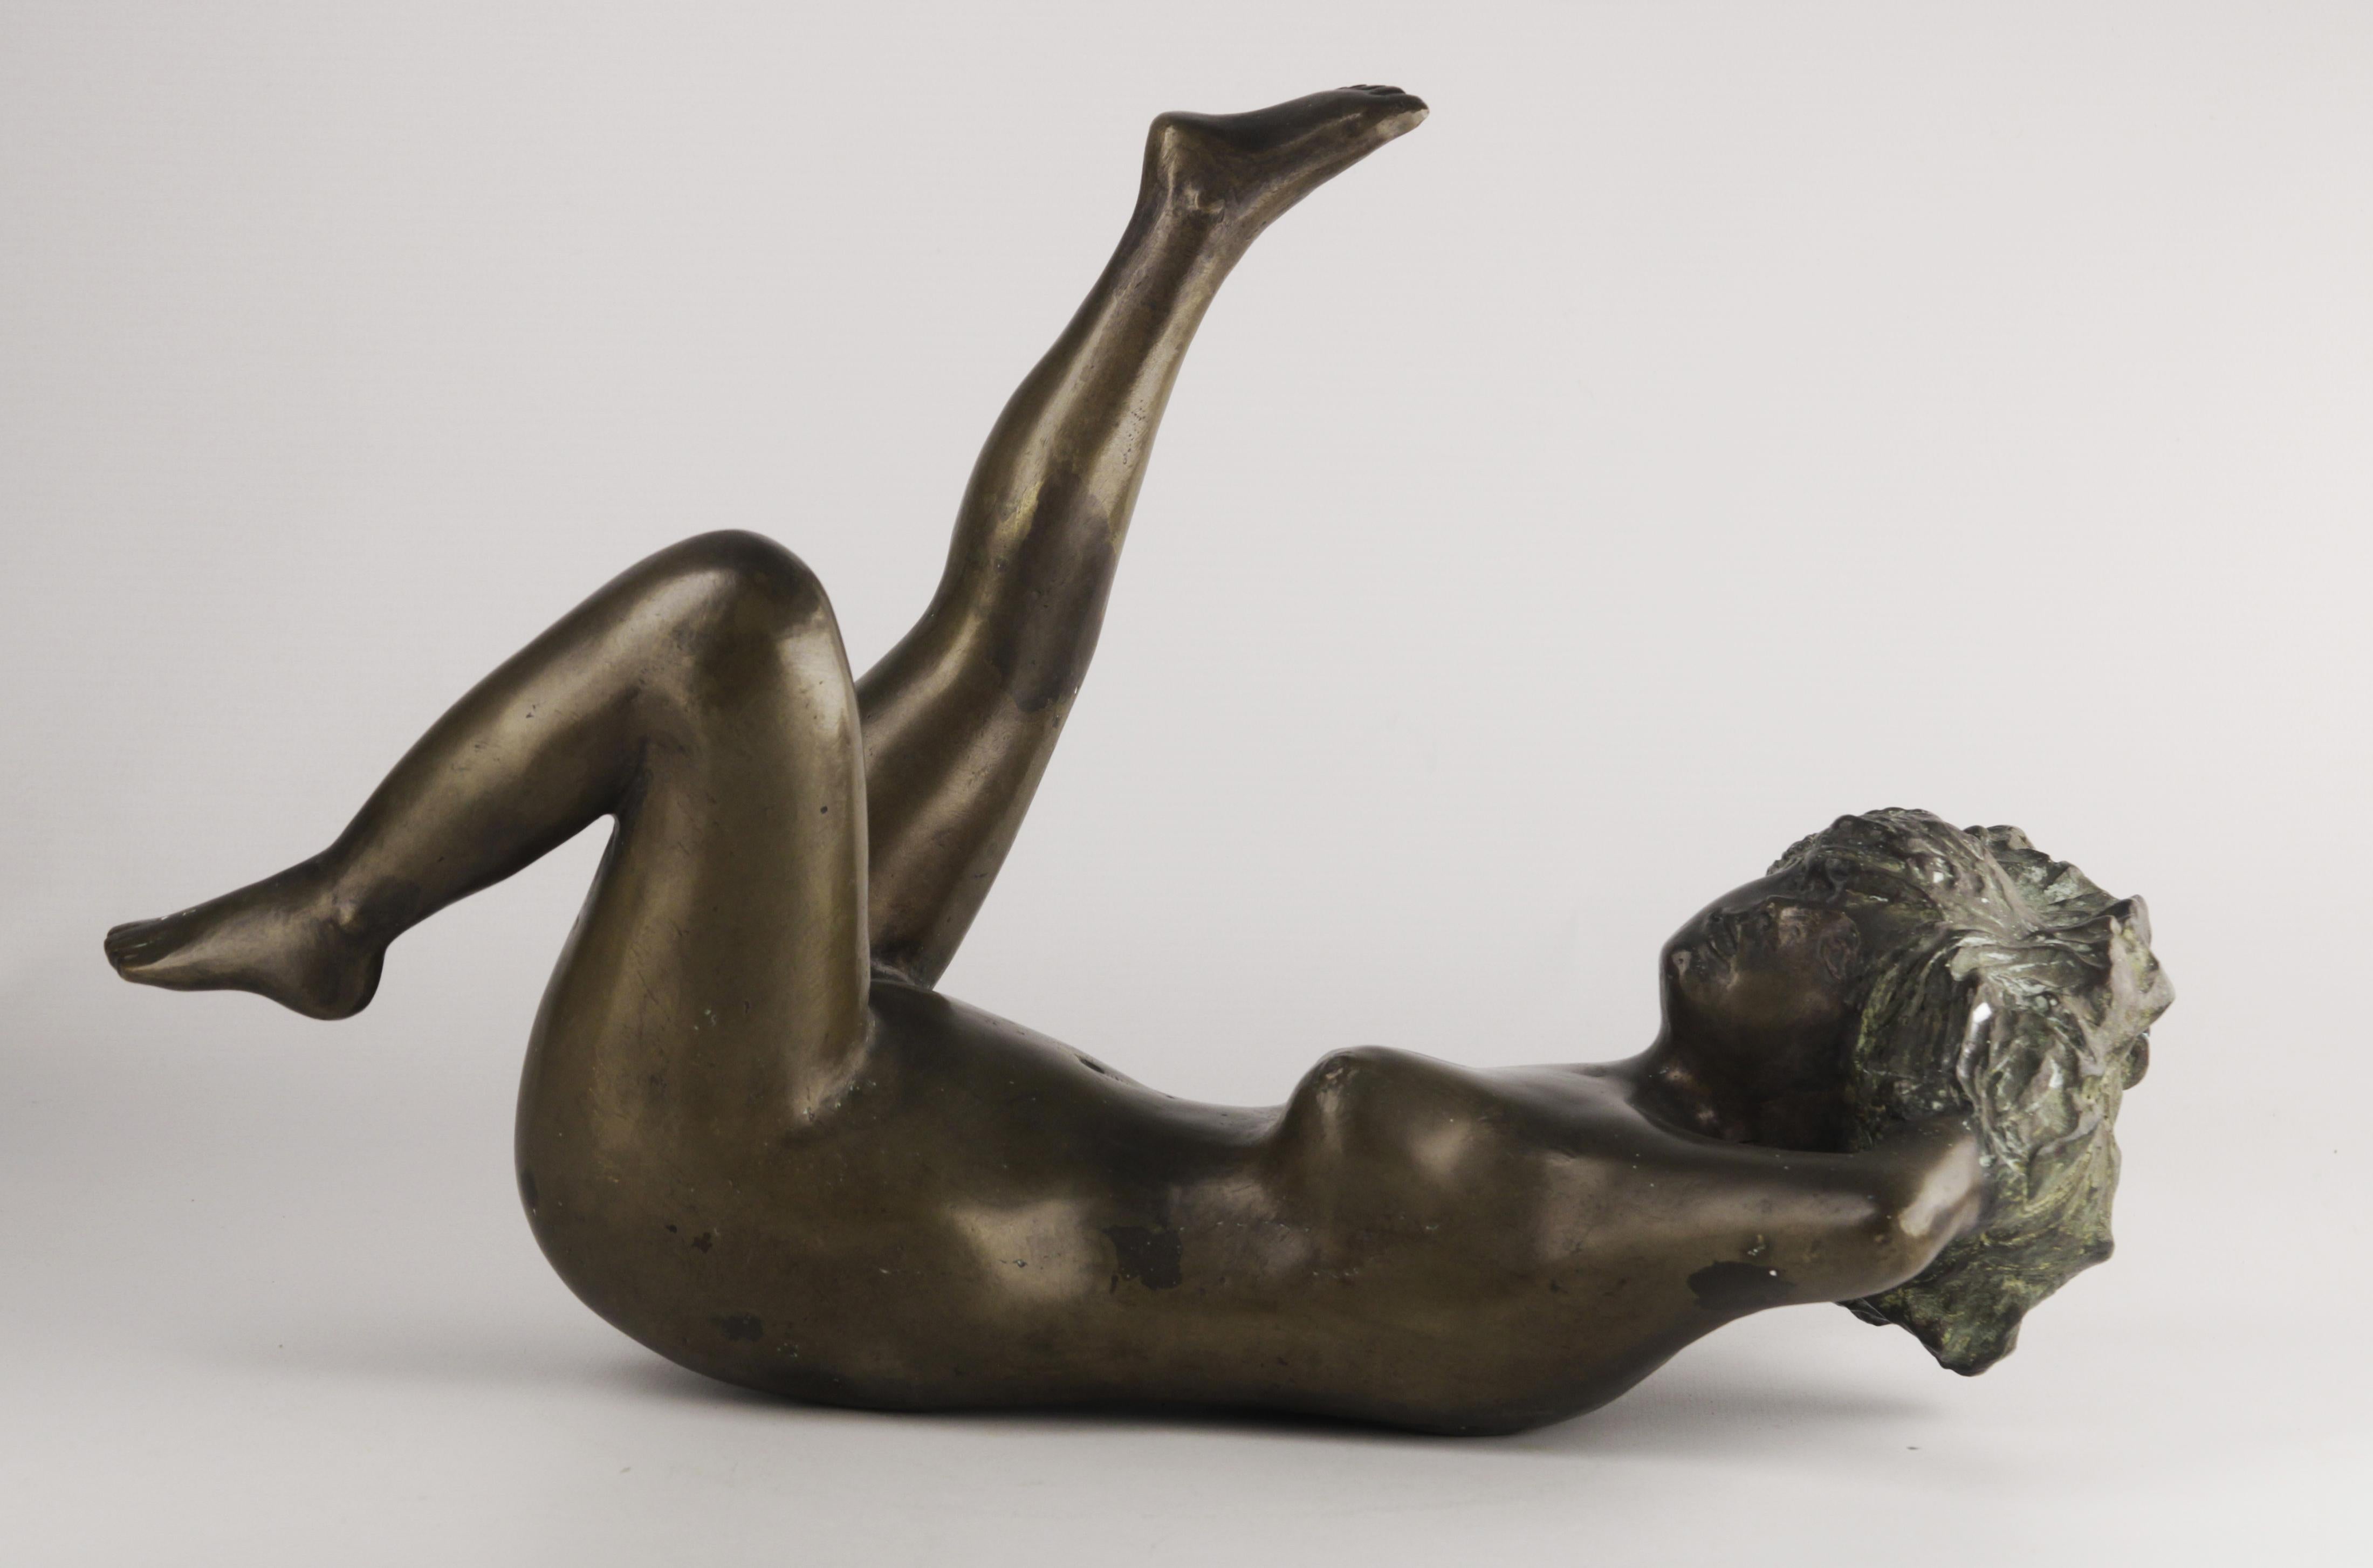 20th century bronze figurative sculpture of a lying woman by argentine sculptor José Mariano Pagés

By: José Mariano Pagés
Material: bronze, copper, metal
Technique: cast, patinated, polished, metalwork, molded, patinated
Dimensions: 16,5 in x 9 in